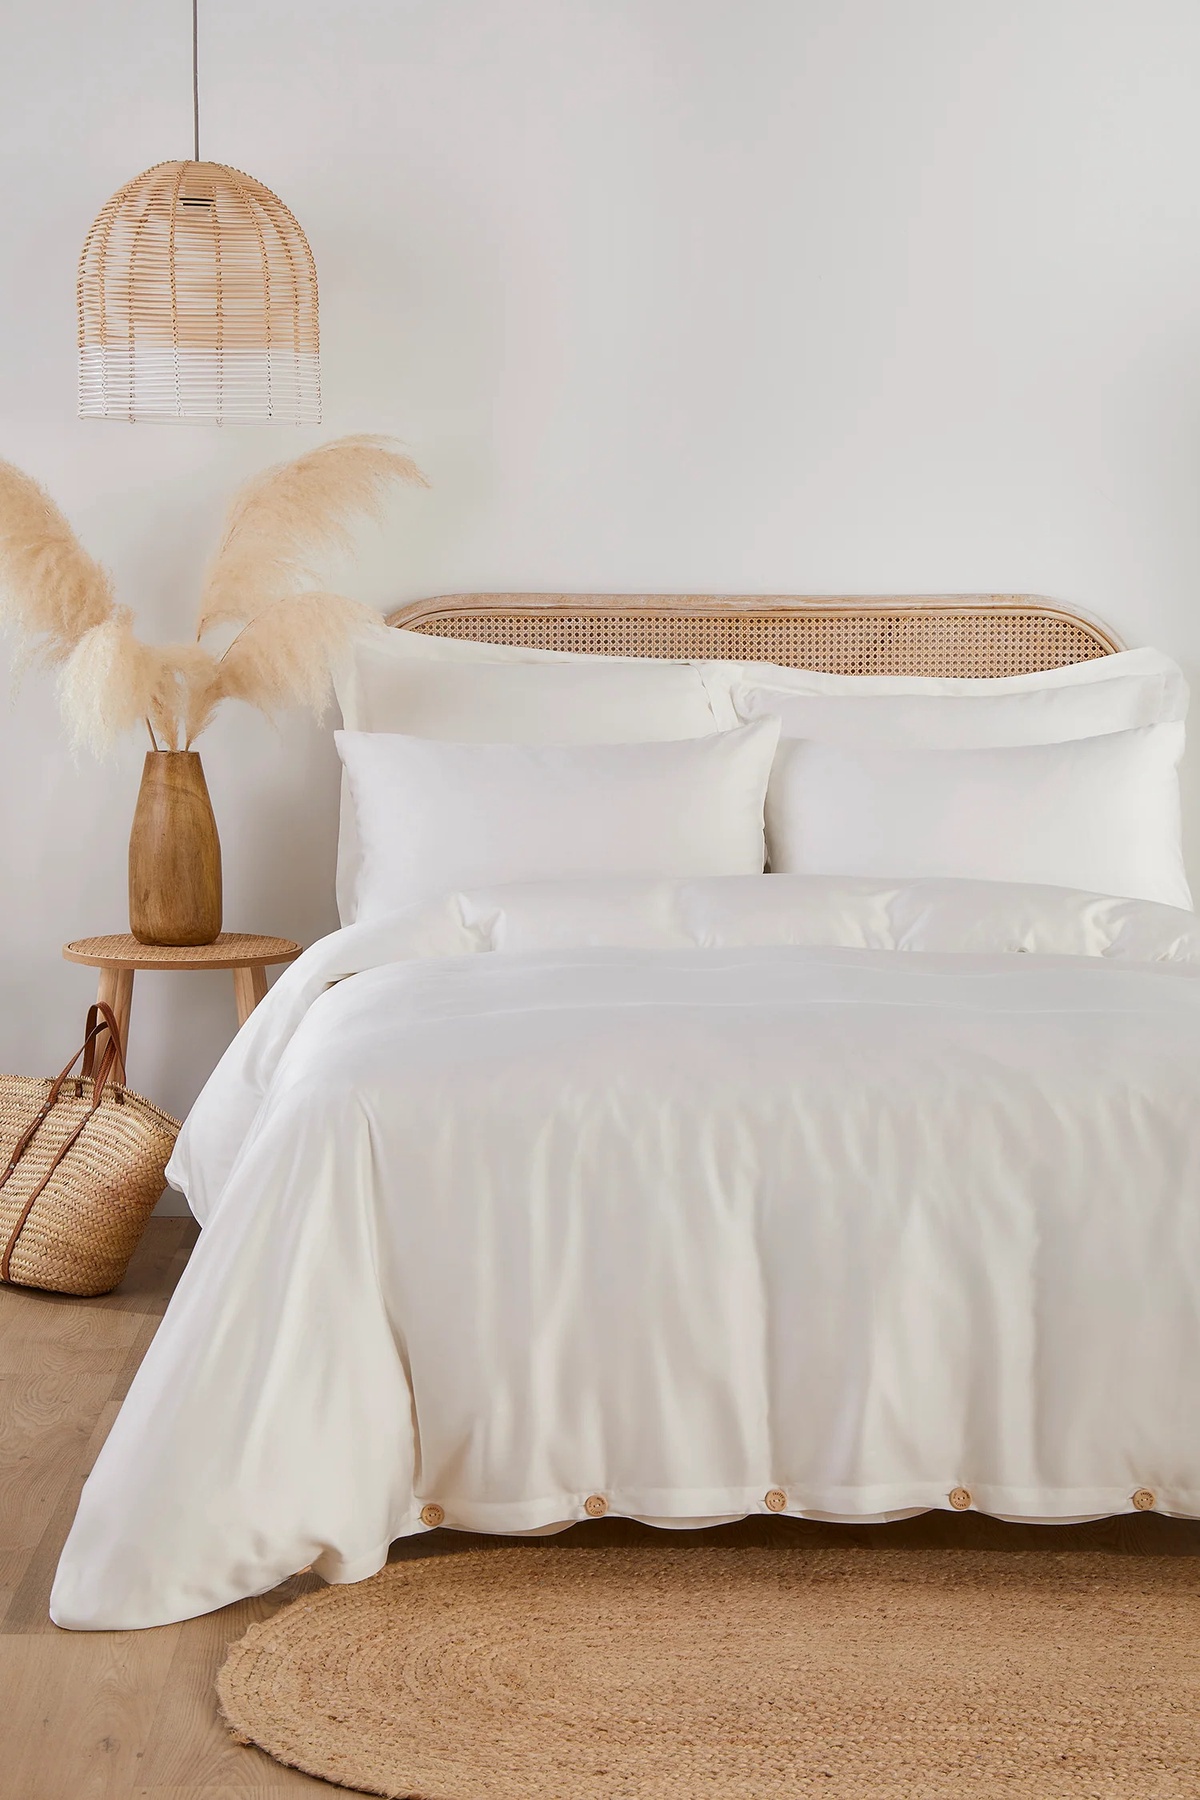 The Eco-Friendly Choice: Bamboo Bedding